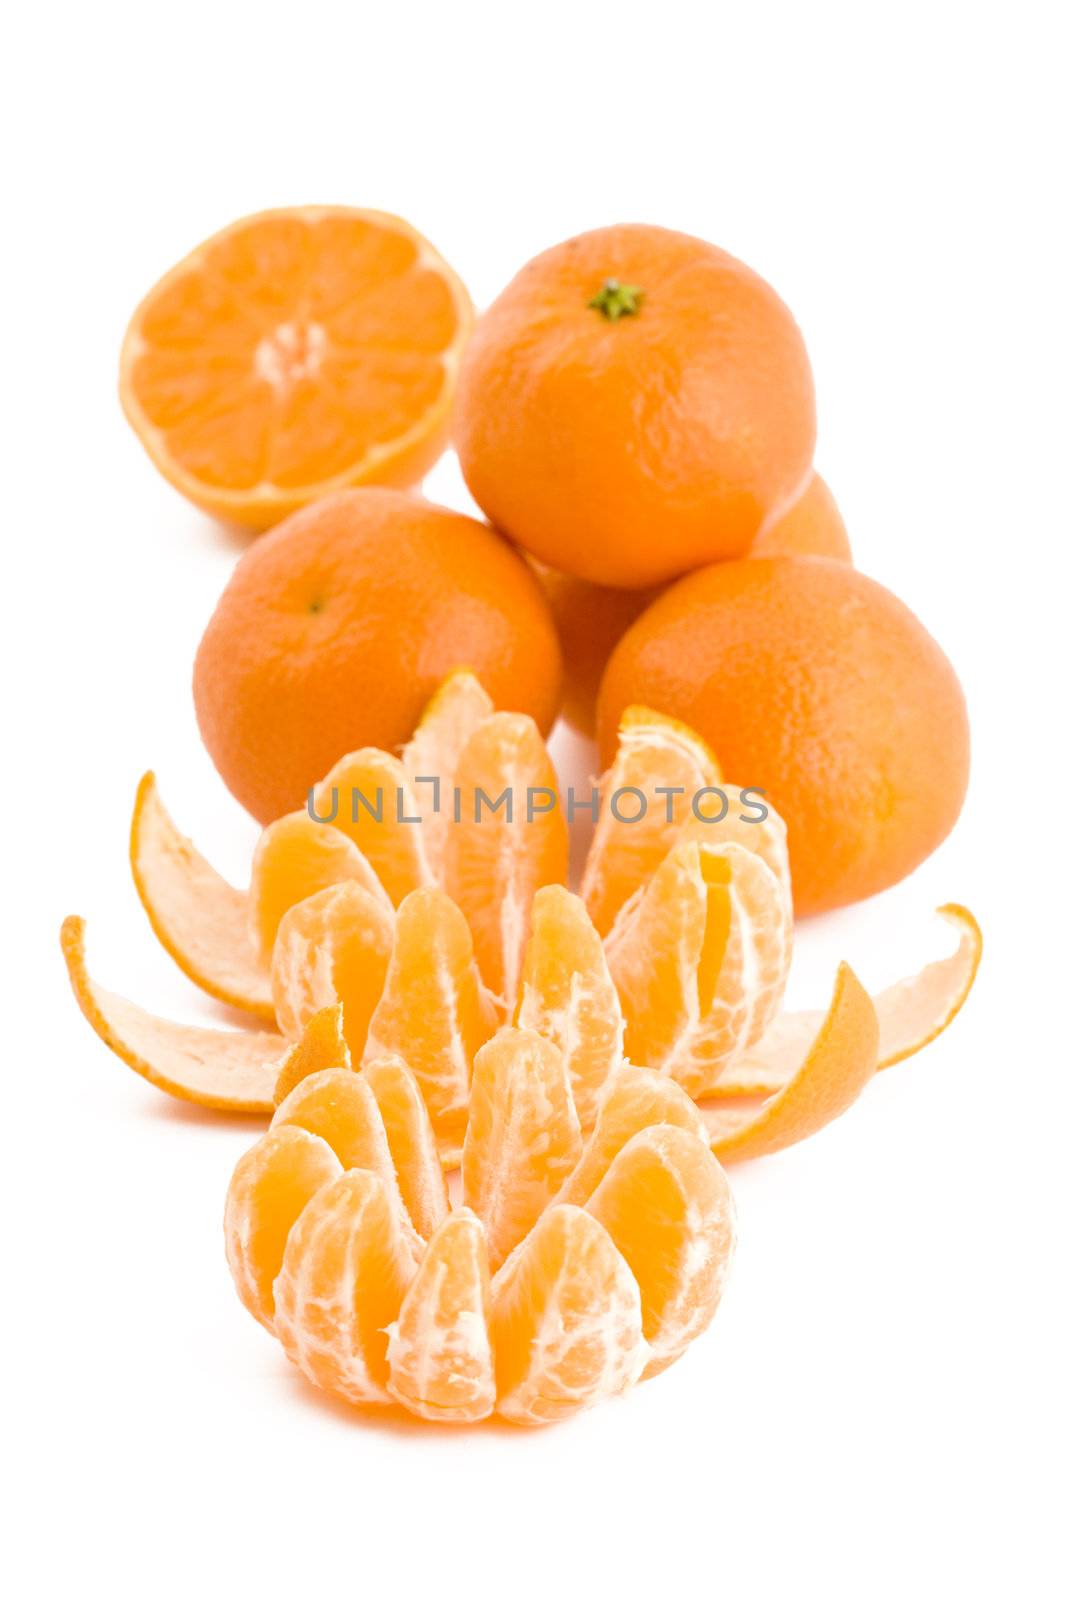 Fresh juicy tangerines in isolated on white background